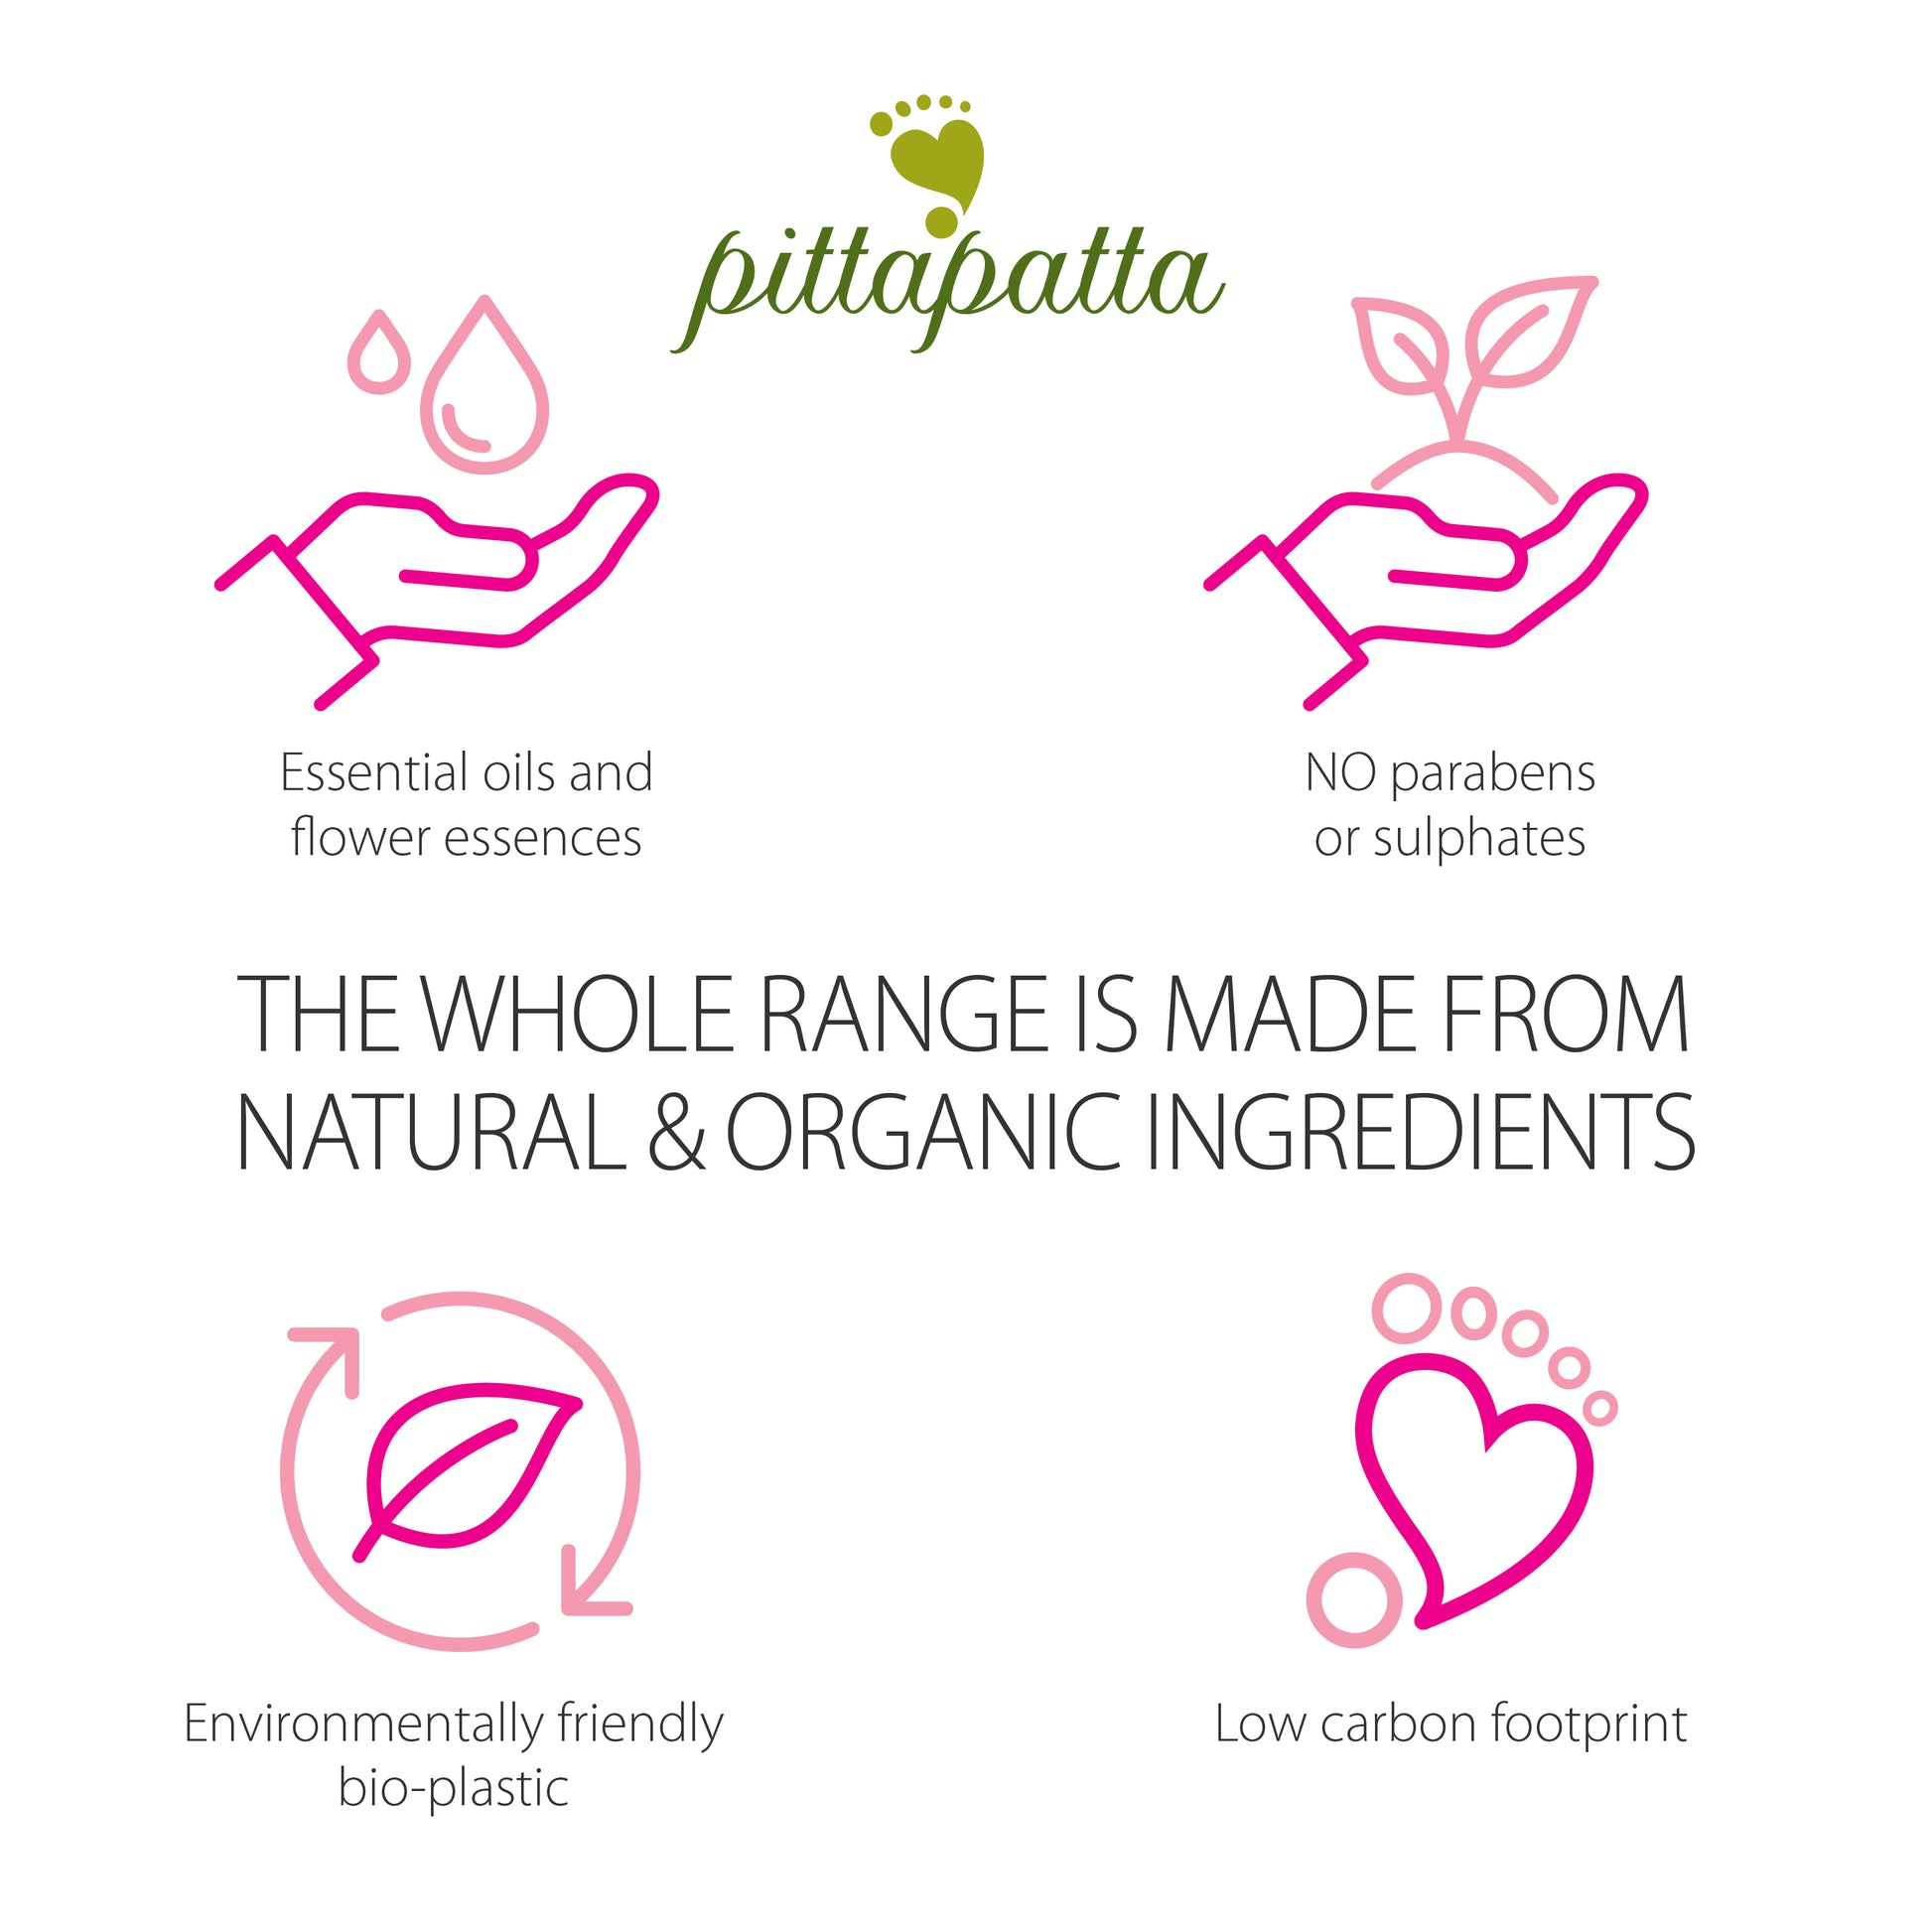 Pittapatta bodycare range is made from natural and organic ingredients and infused with organic essential oils and flower essences designed to be gentle and a joy to use.